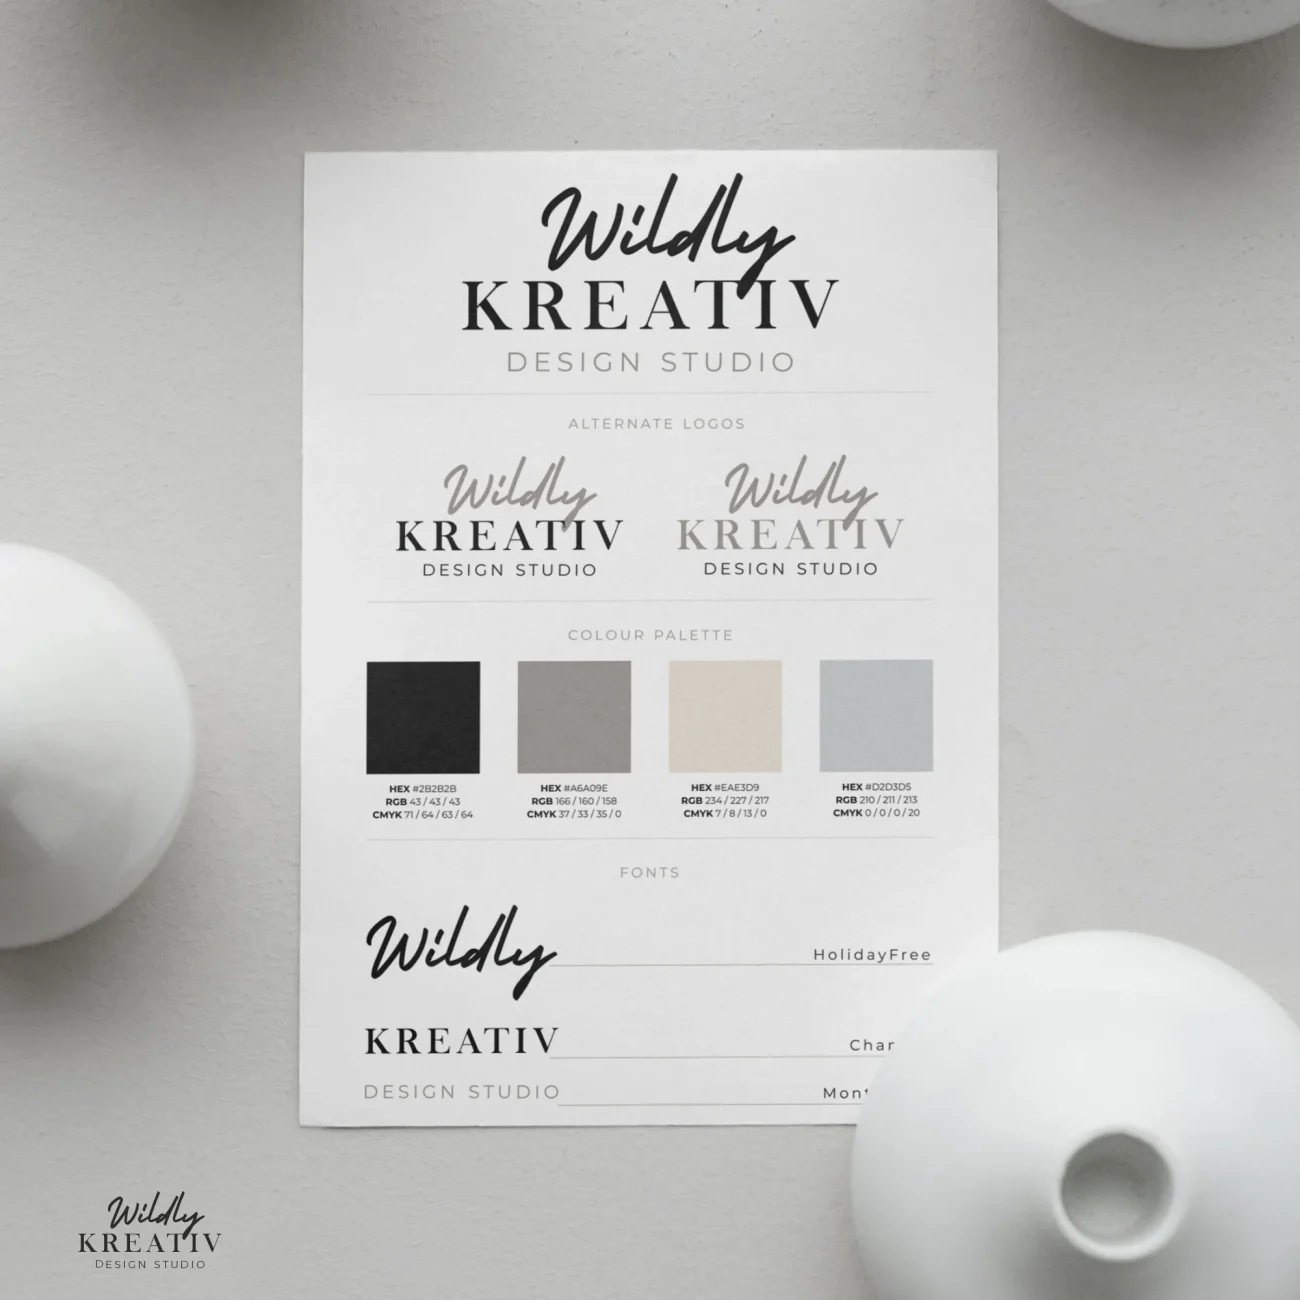 Wildly Kreativ Brand Style Guide Design 1